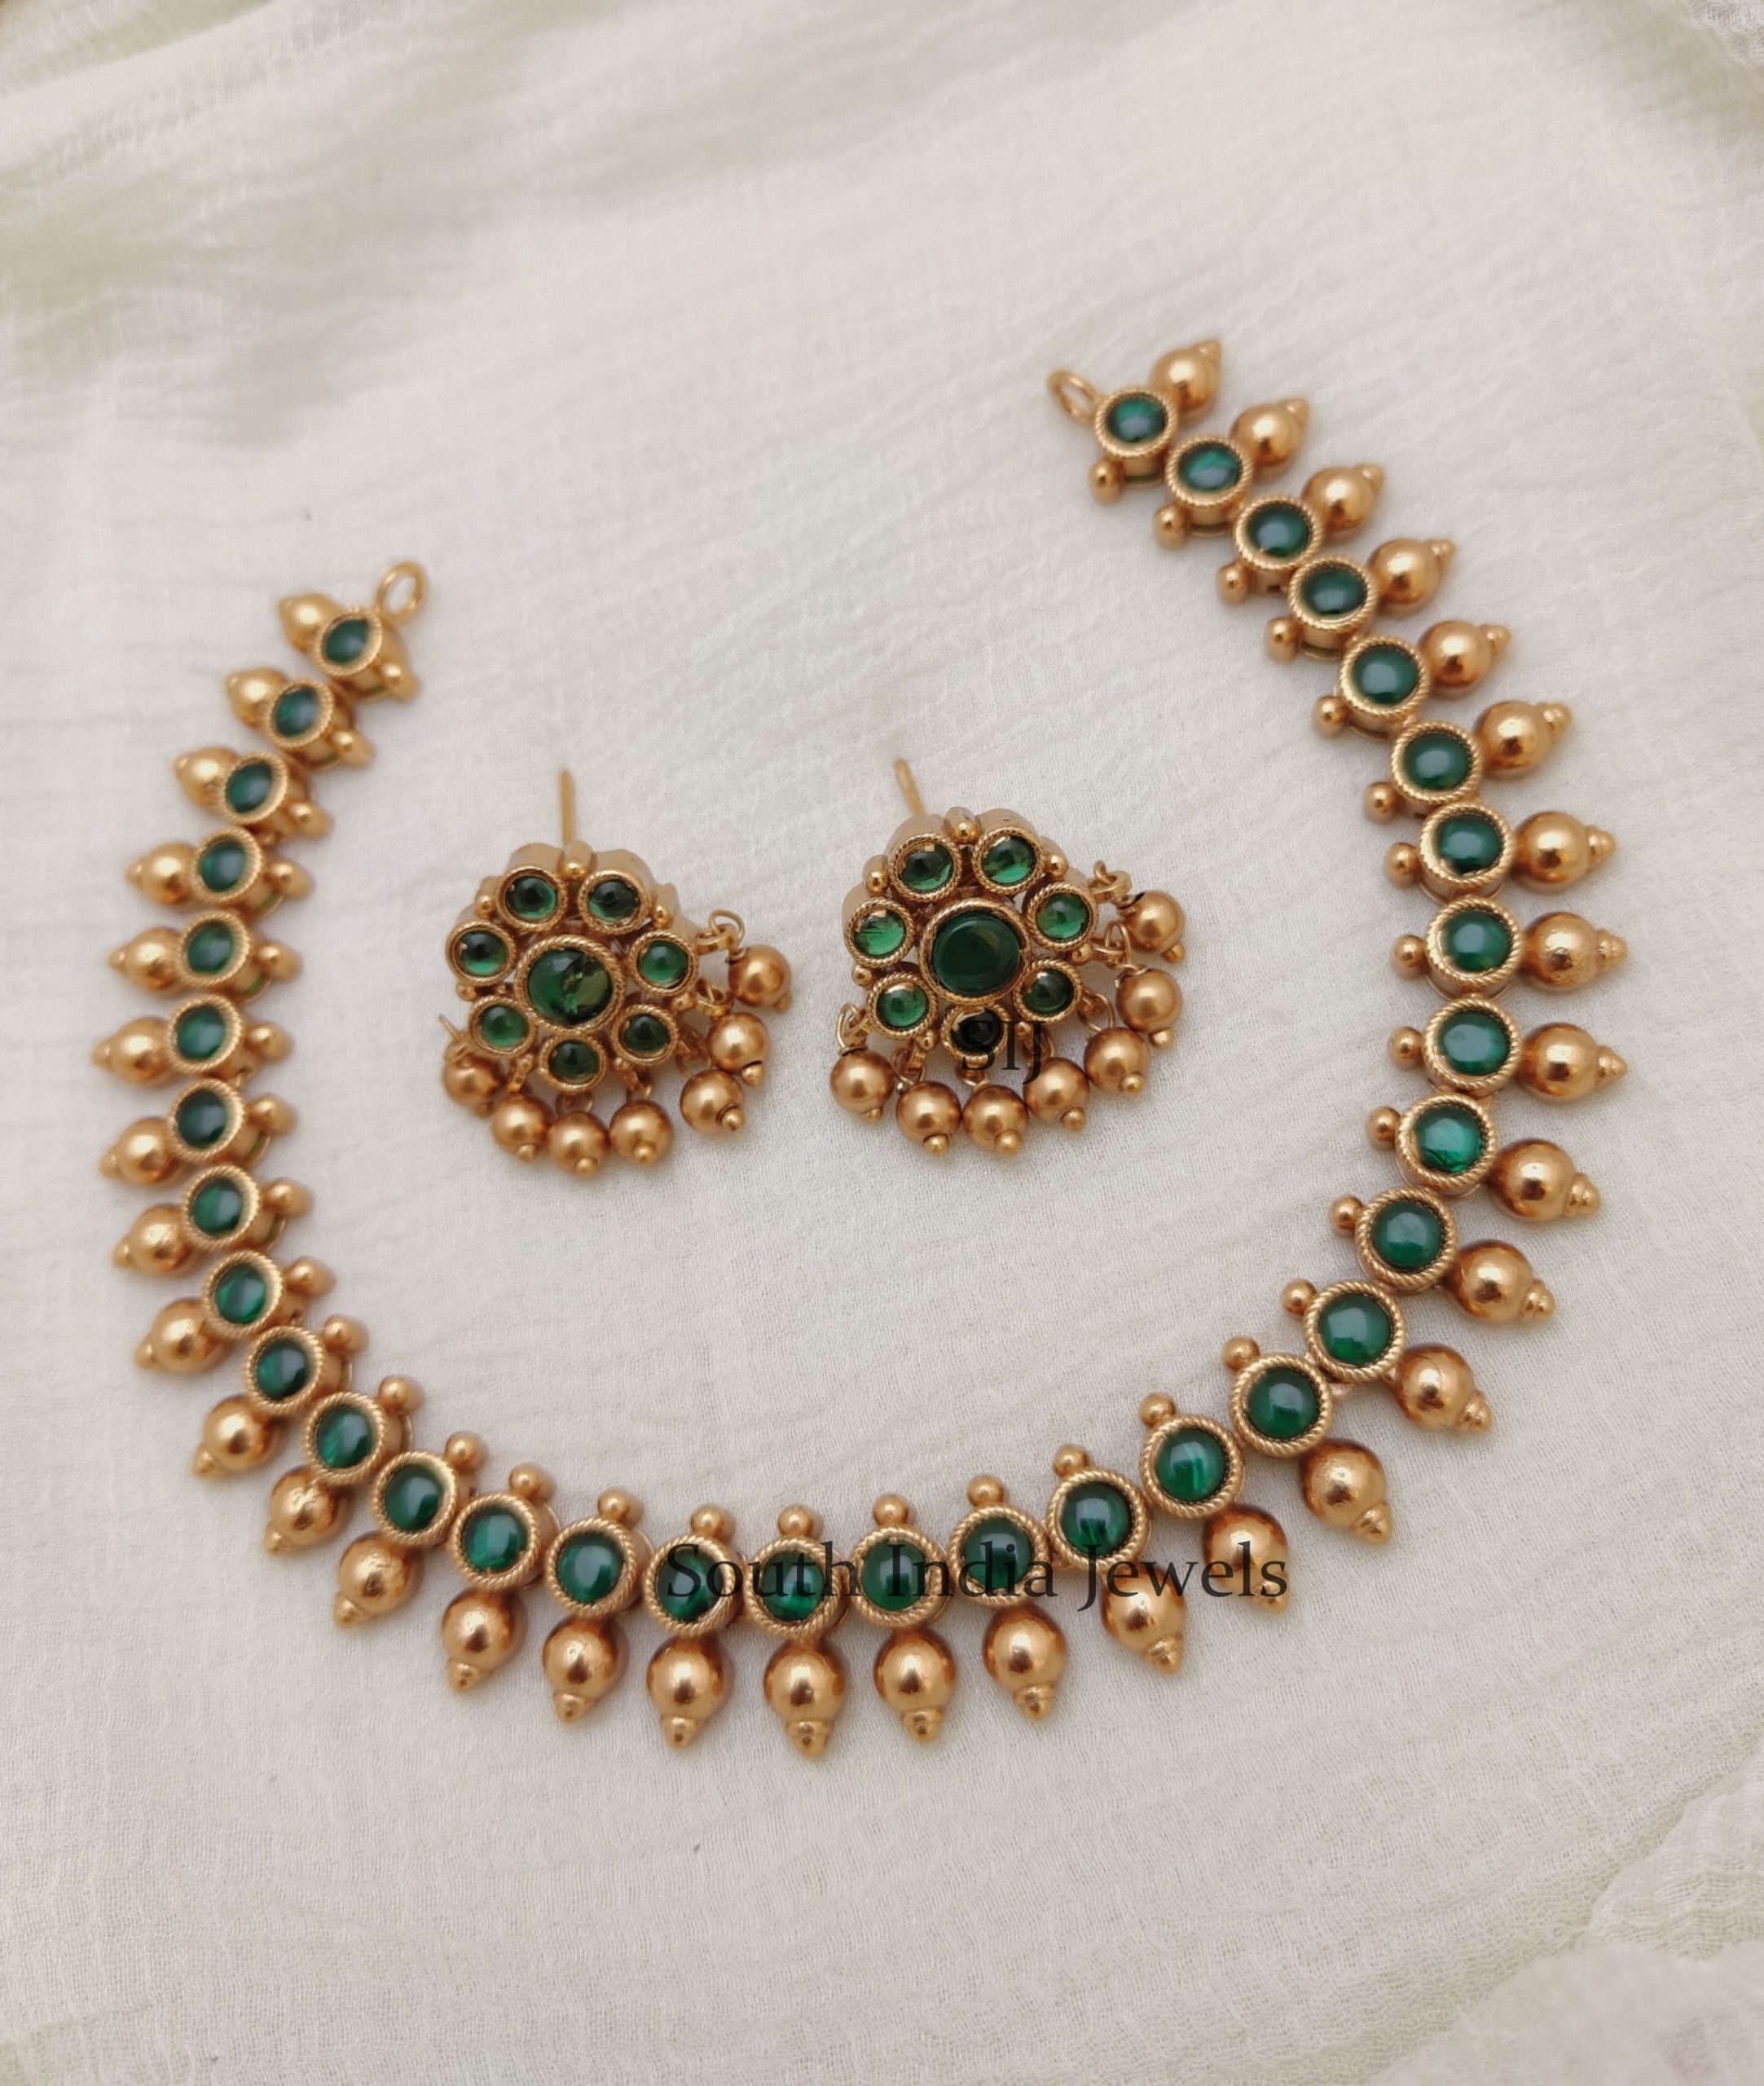 Gorgeous Green Stones Necklace (2)